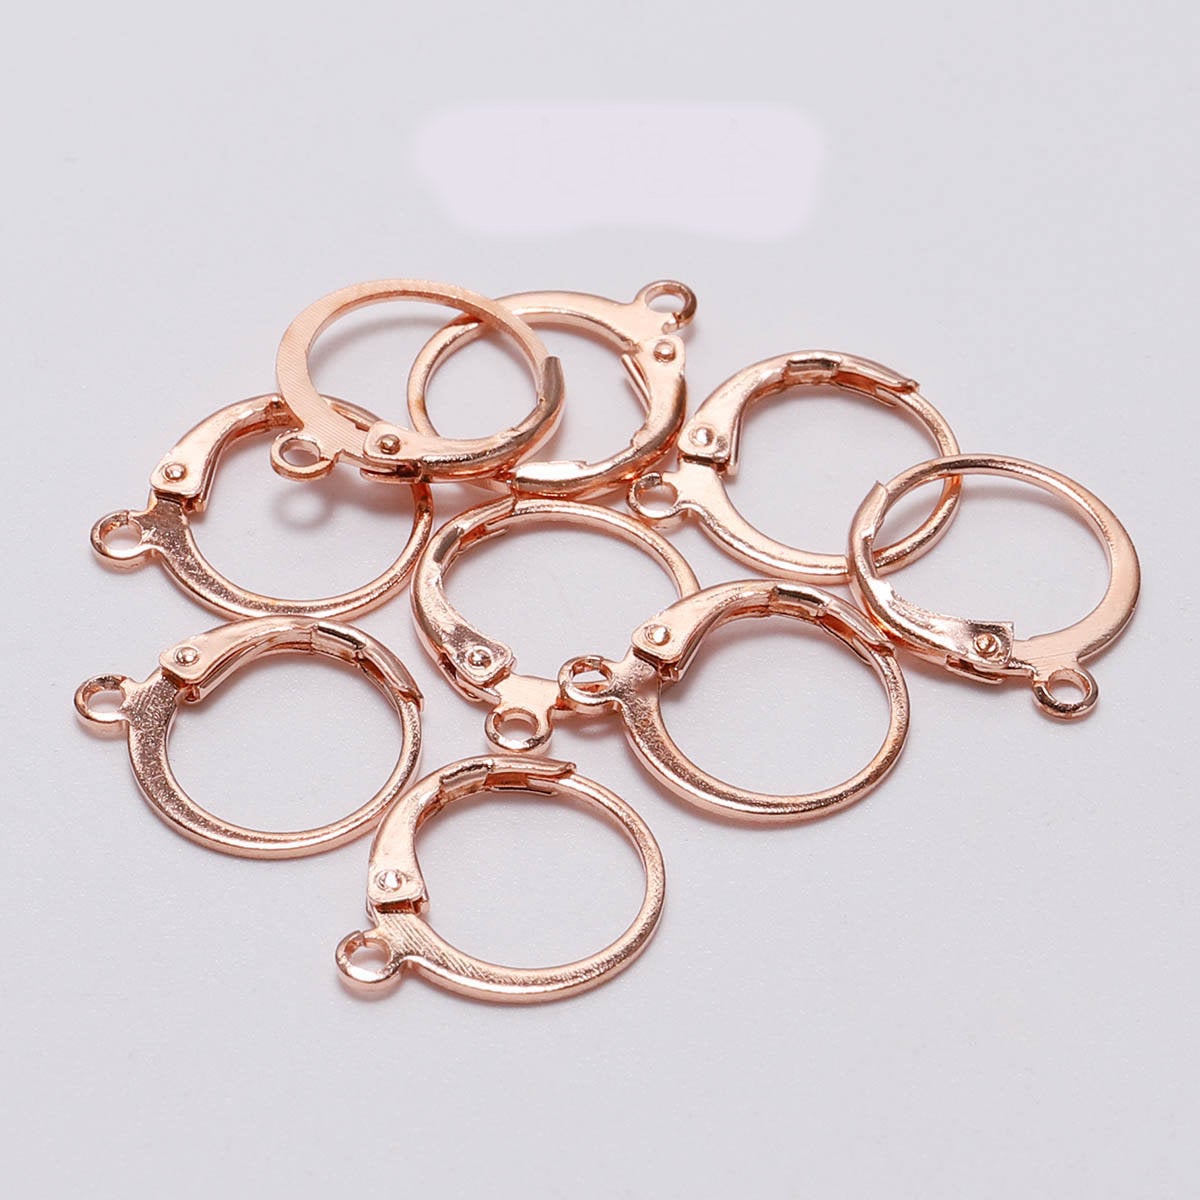 Hoop Earring Findings, 18 Pairs Round Beading Hoop Earrings Bulk Hypoallergenic Earrings Ring Findings Component Accessories for Earring Jewelry